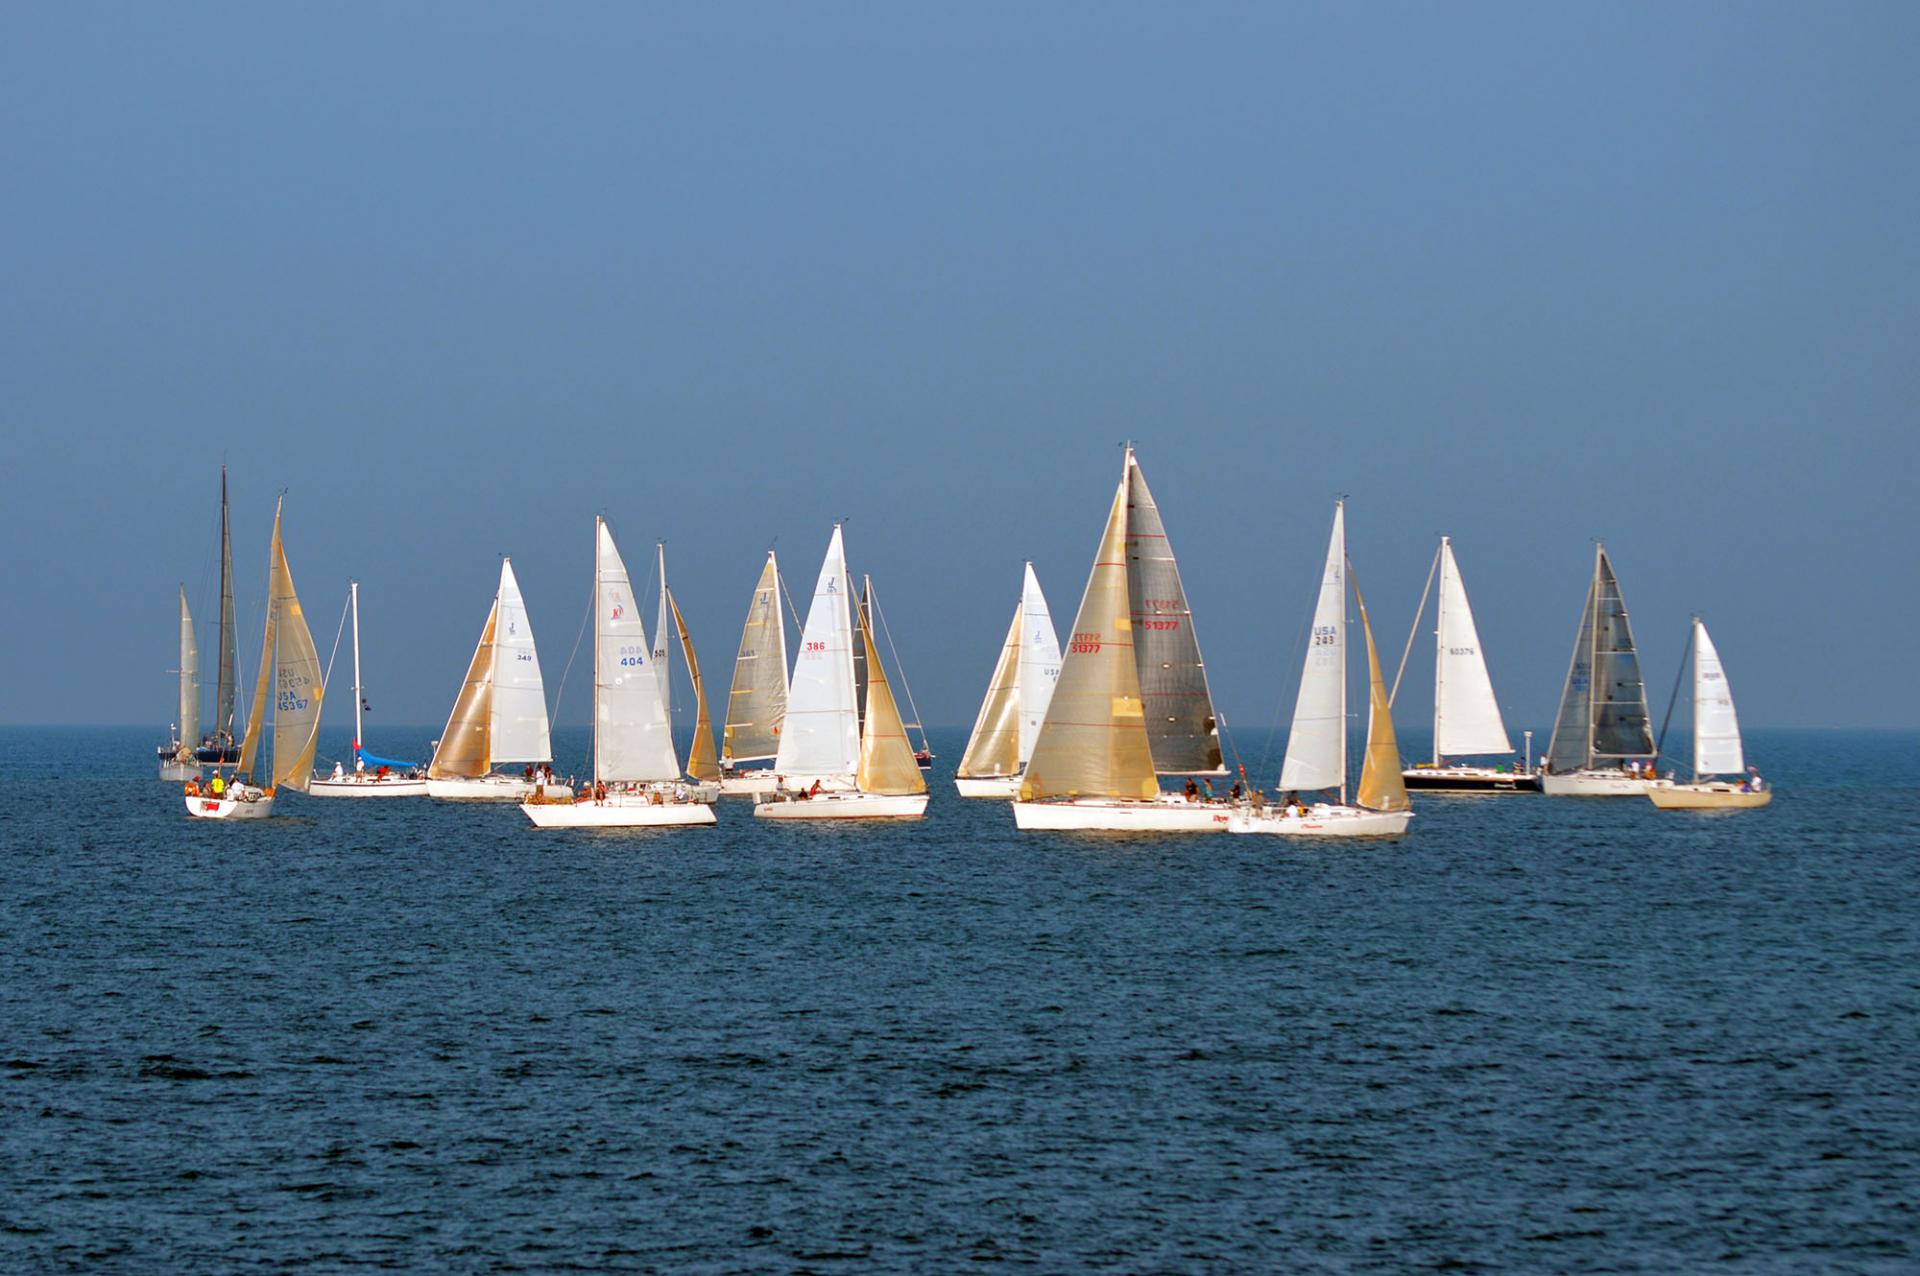 A bunch of sail boats